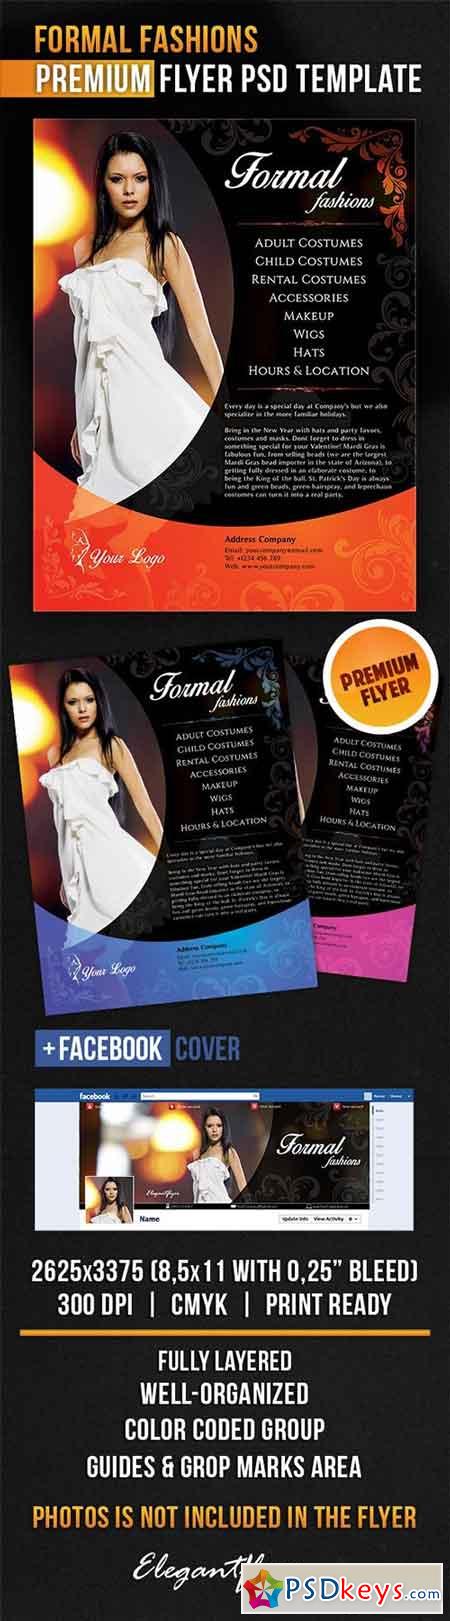 Formal Fashions Flyer PSD Template + Facebook Cover